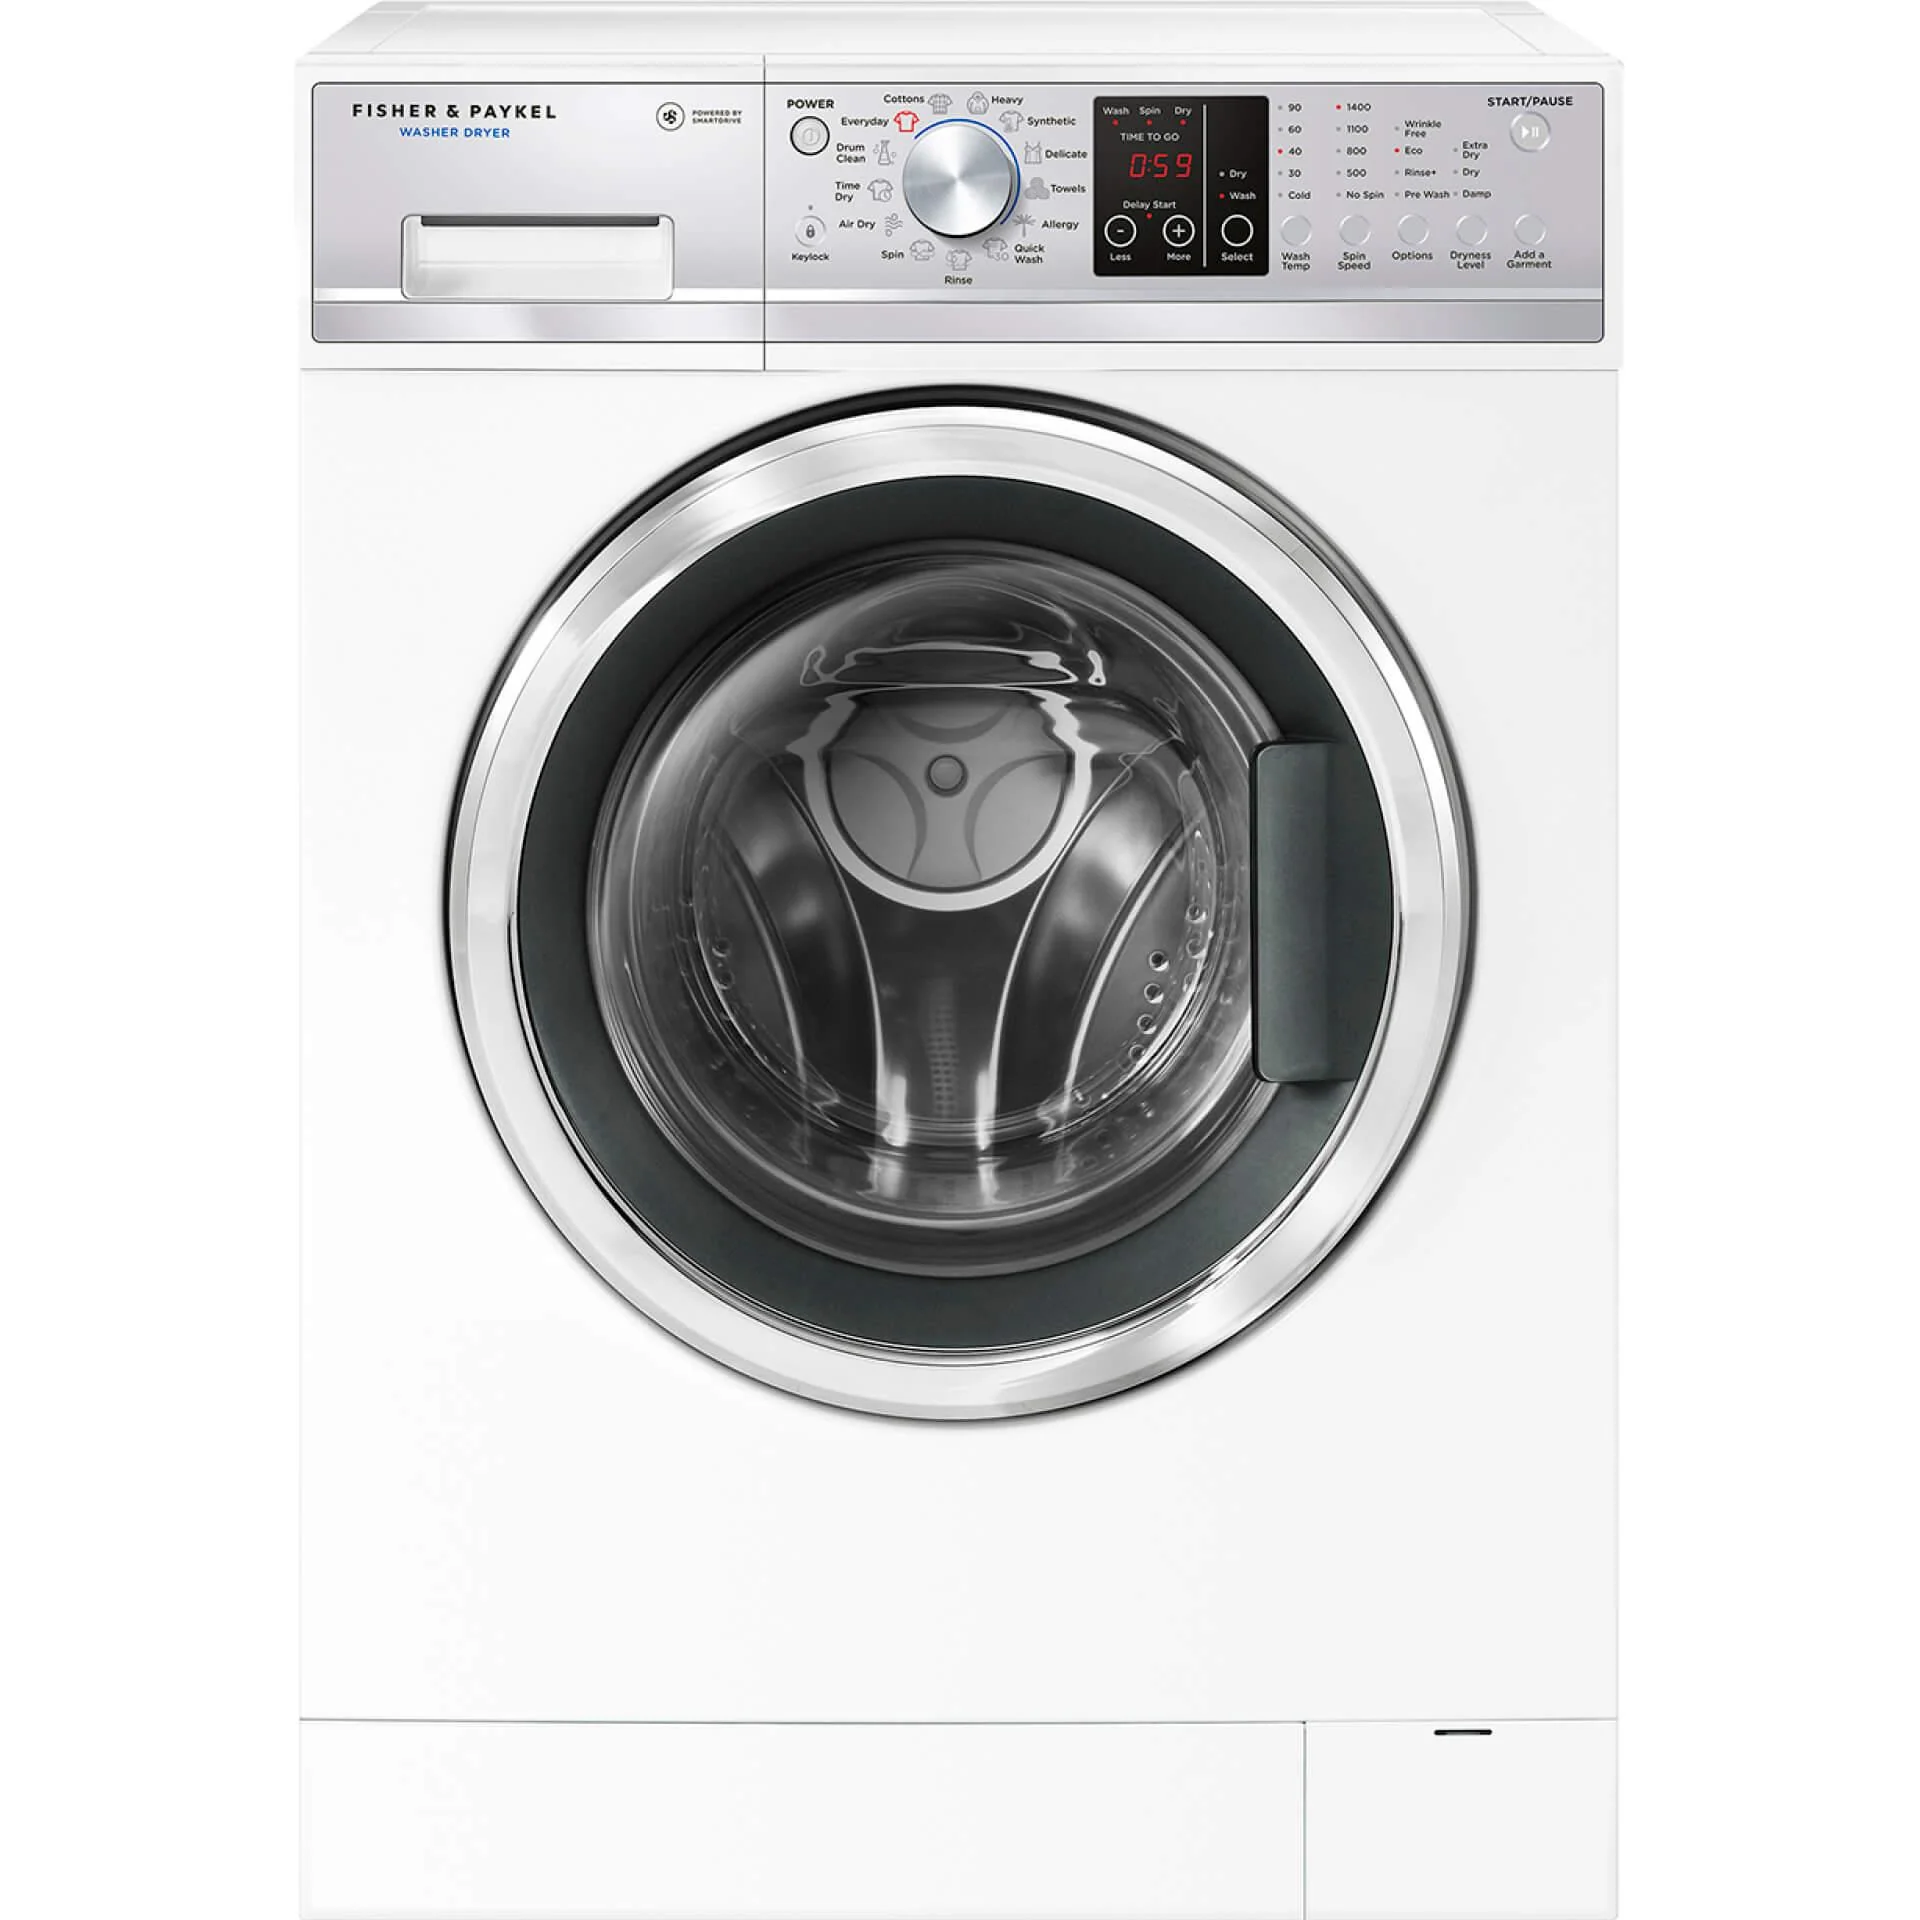 Fisher & Paykel 7.5kg/4kg Washer Dryer Combo WD7560P1